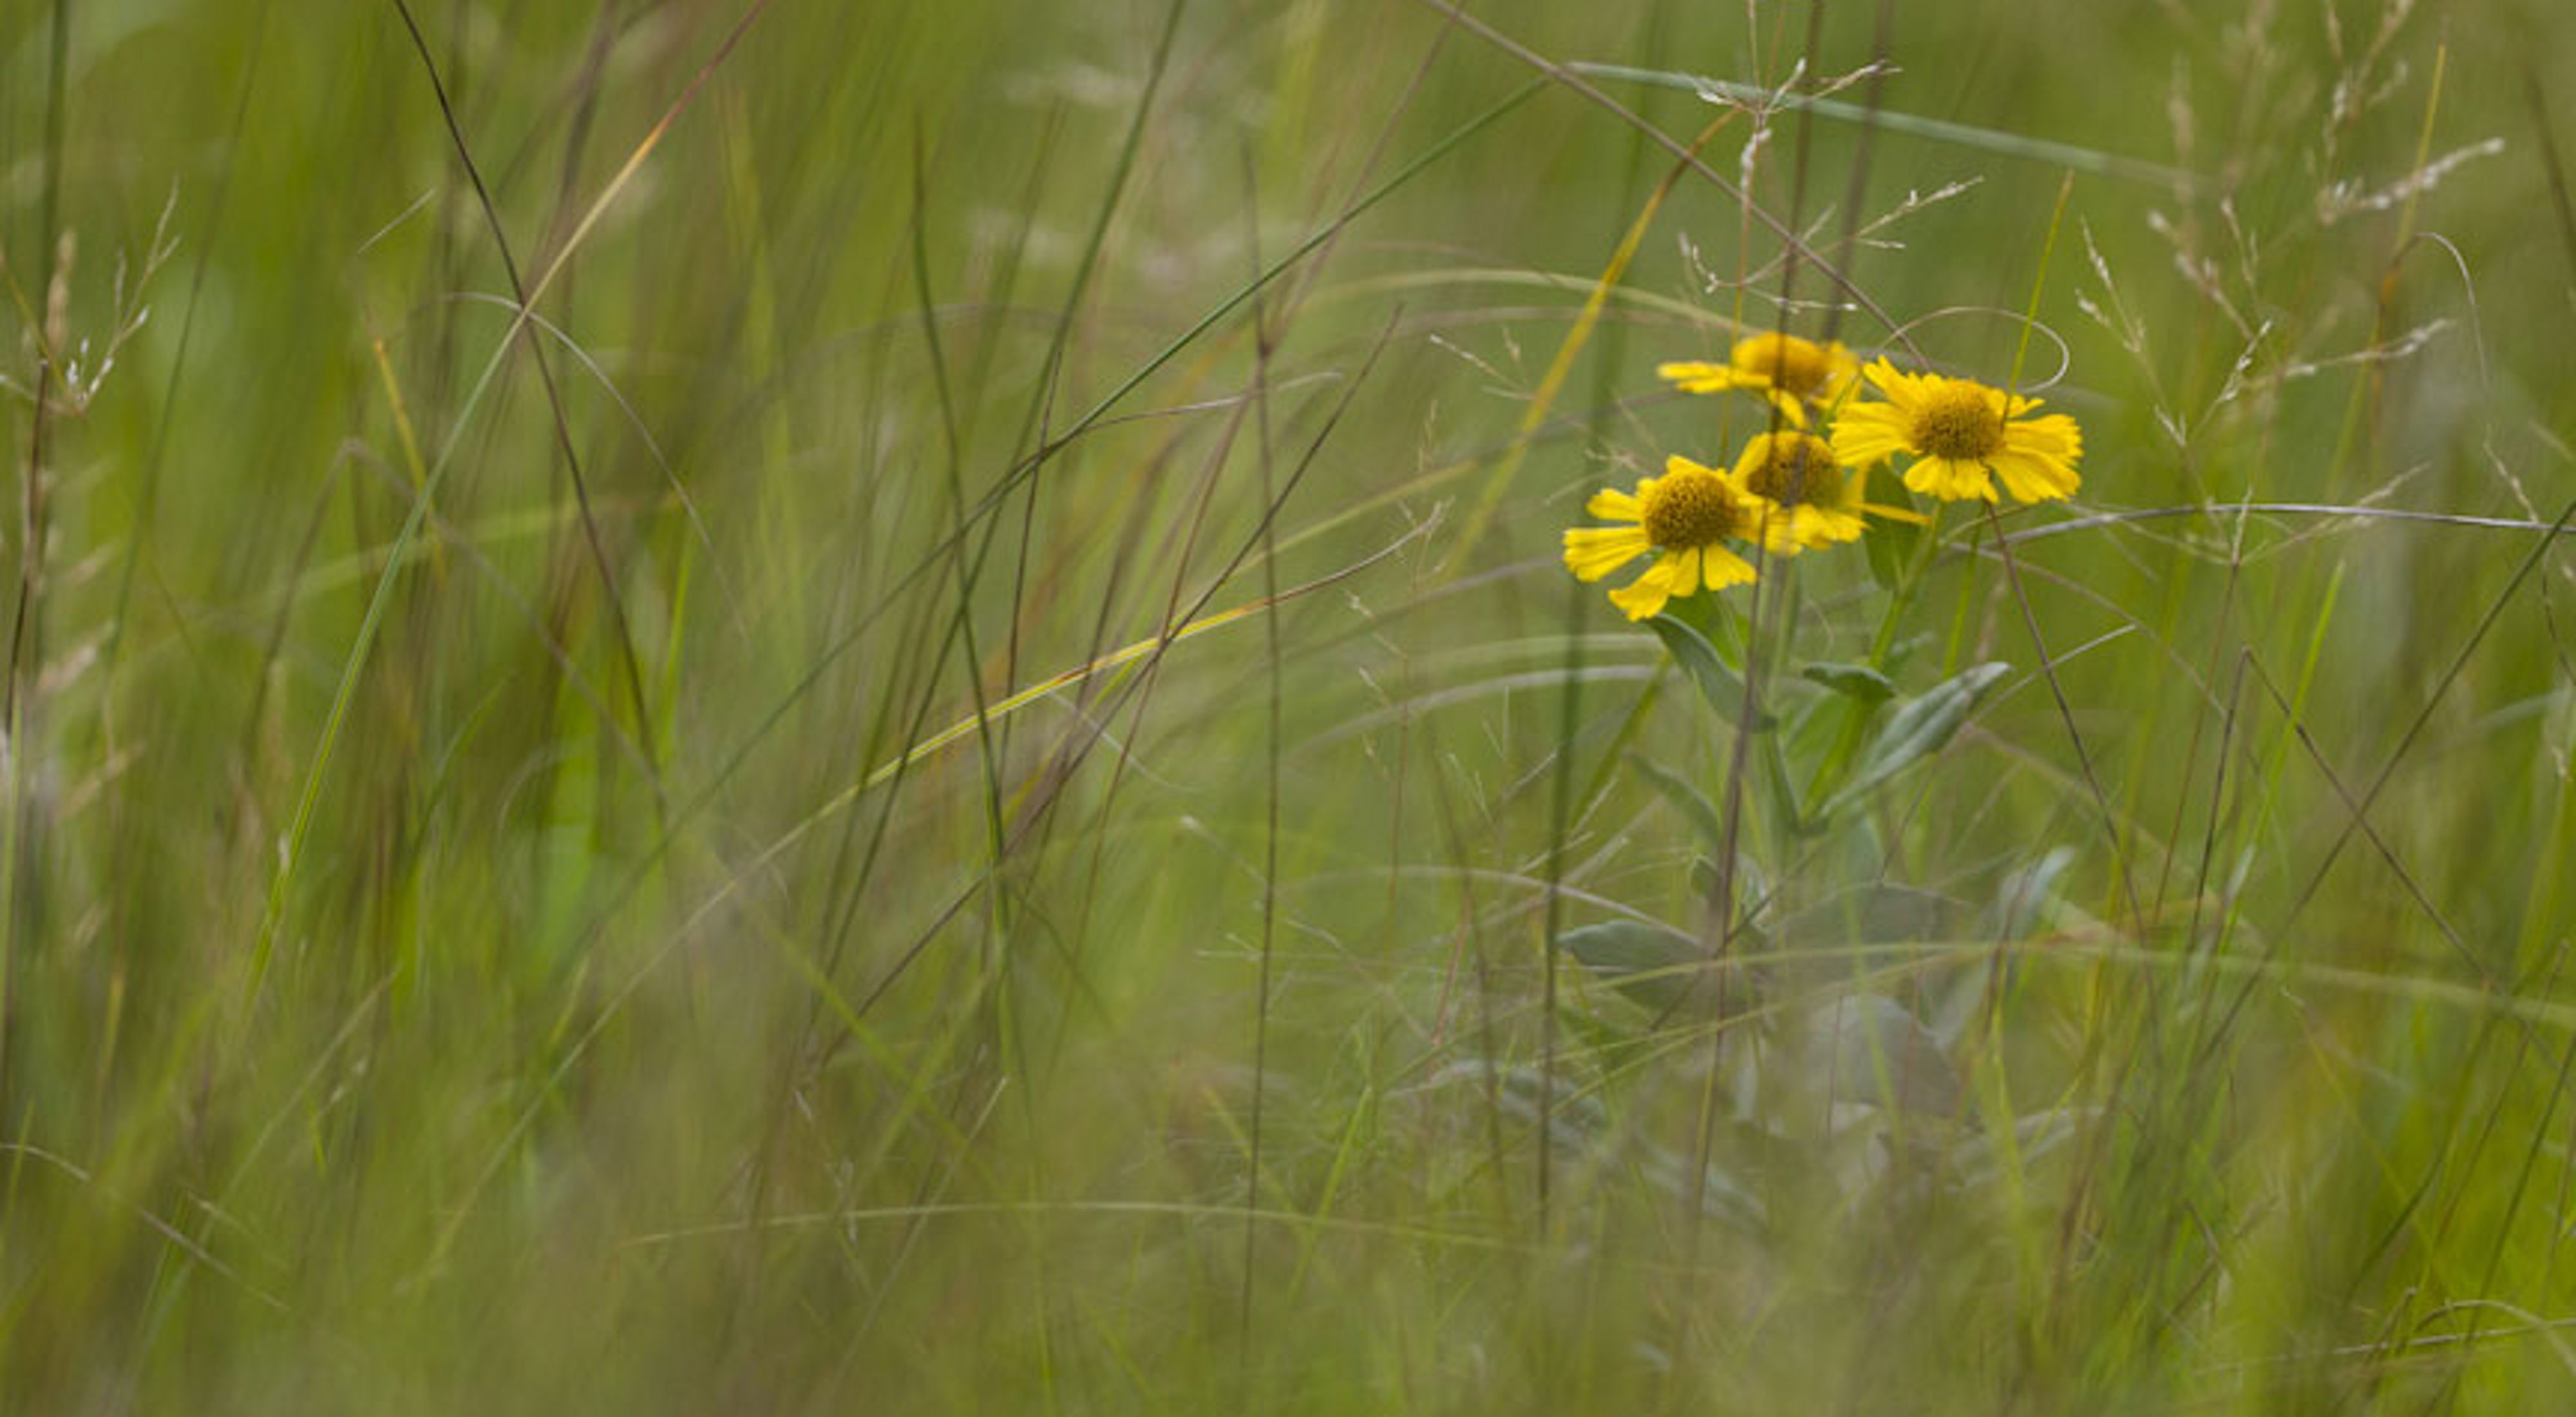 Native grasses and flowering plants in a golden prairie.